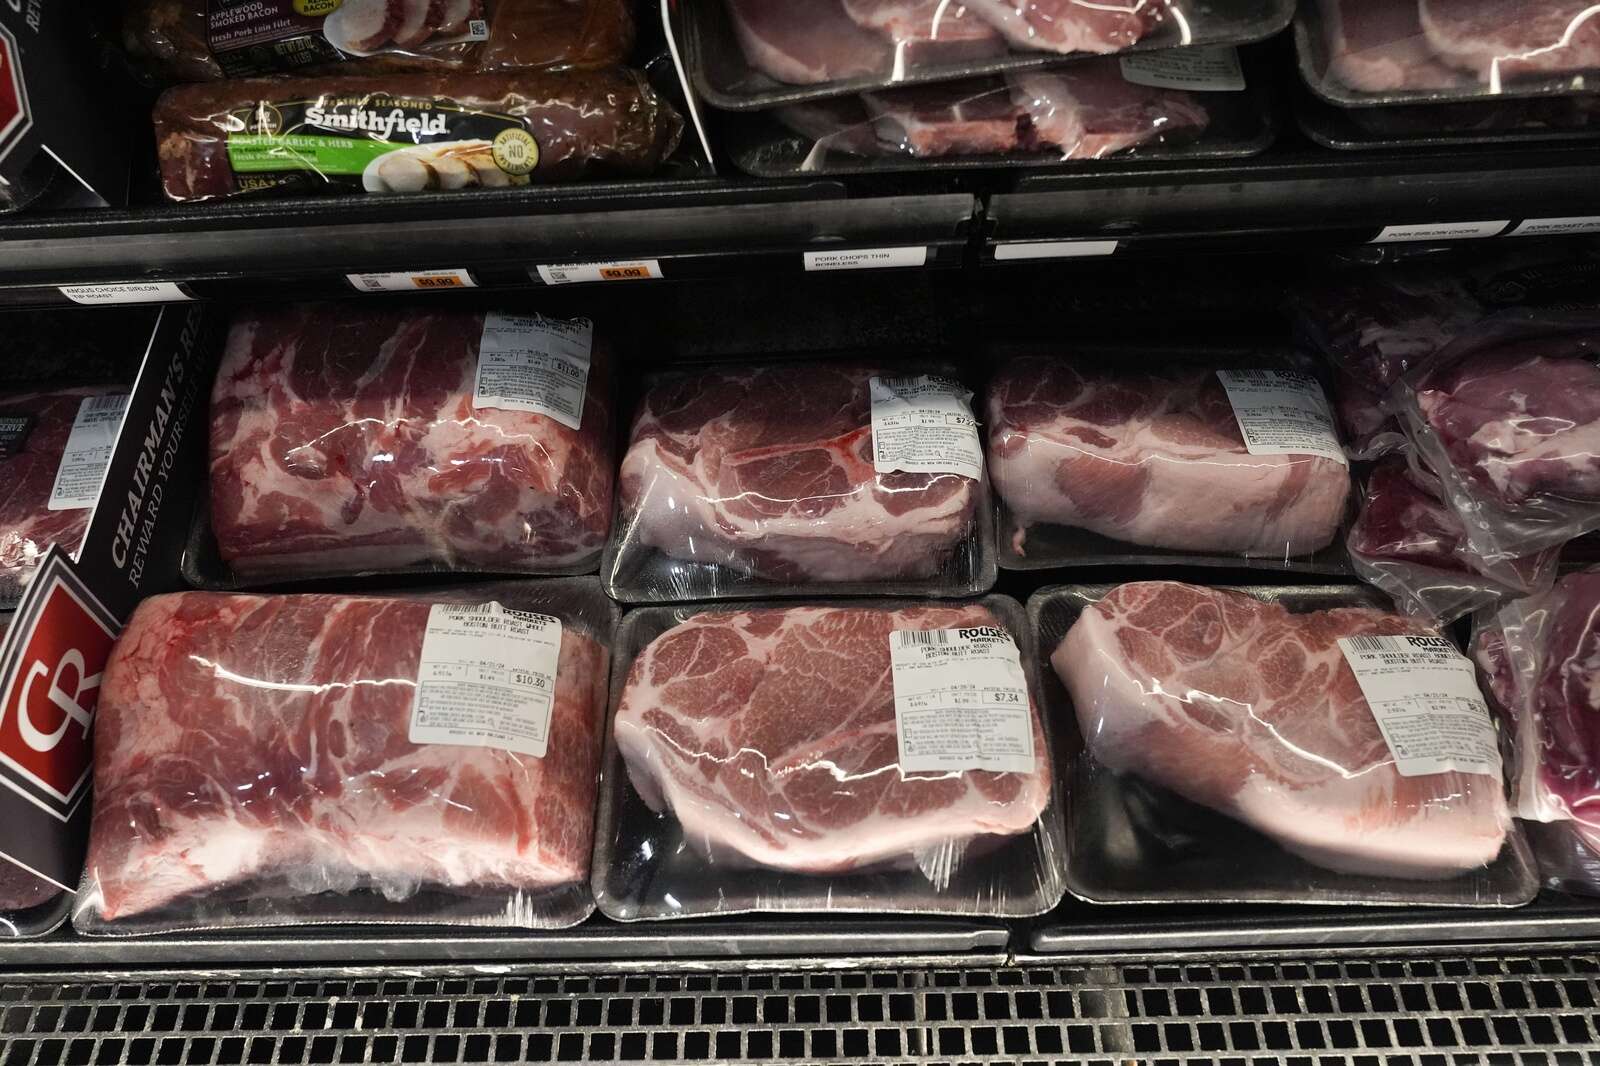 Some Illinois grocery chains are embracing crate-free pork, while others have yet to make the switch